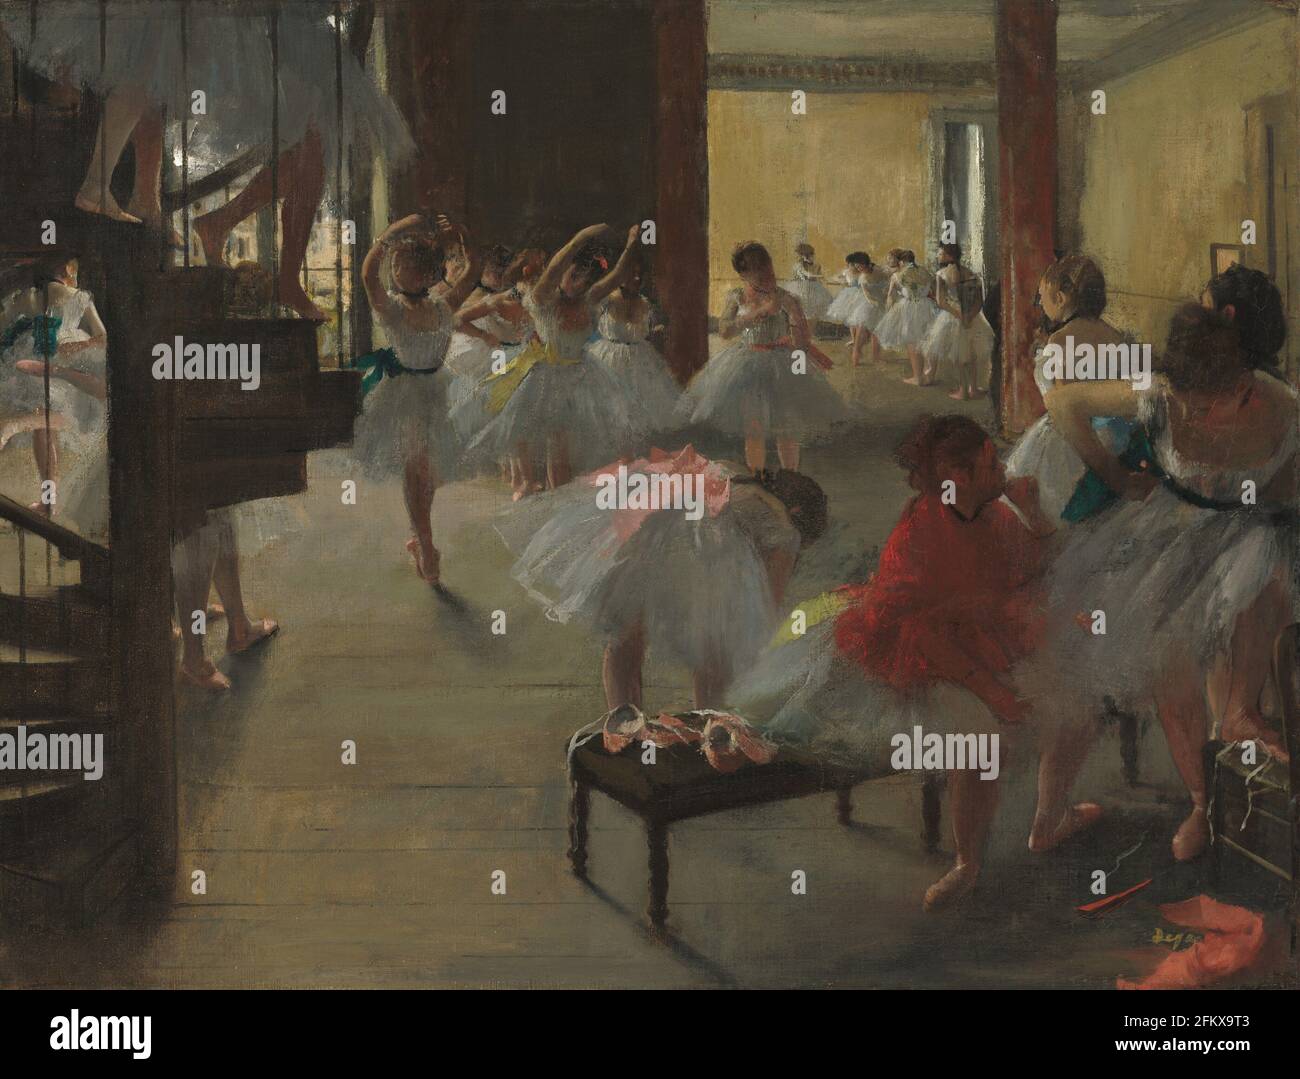 Title: The Dance Class Creator:  Edgar Degas Date: c.1873 Medium: Oil on canvas Dimensions: 47.6x62.2 cms Location: Corcoran Collection, National Gallery of Art, Washington D.C., USA Stock Photo